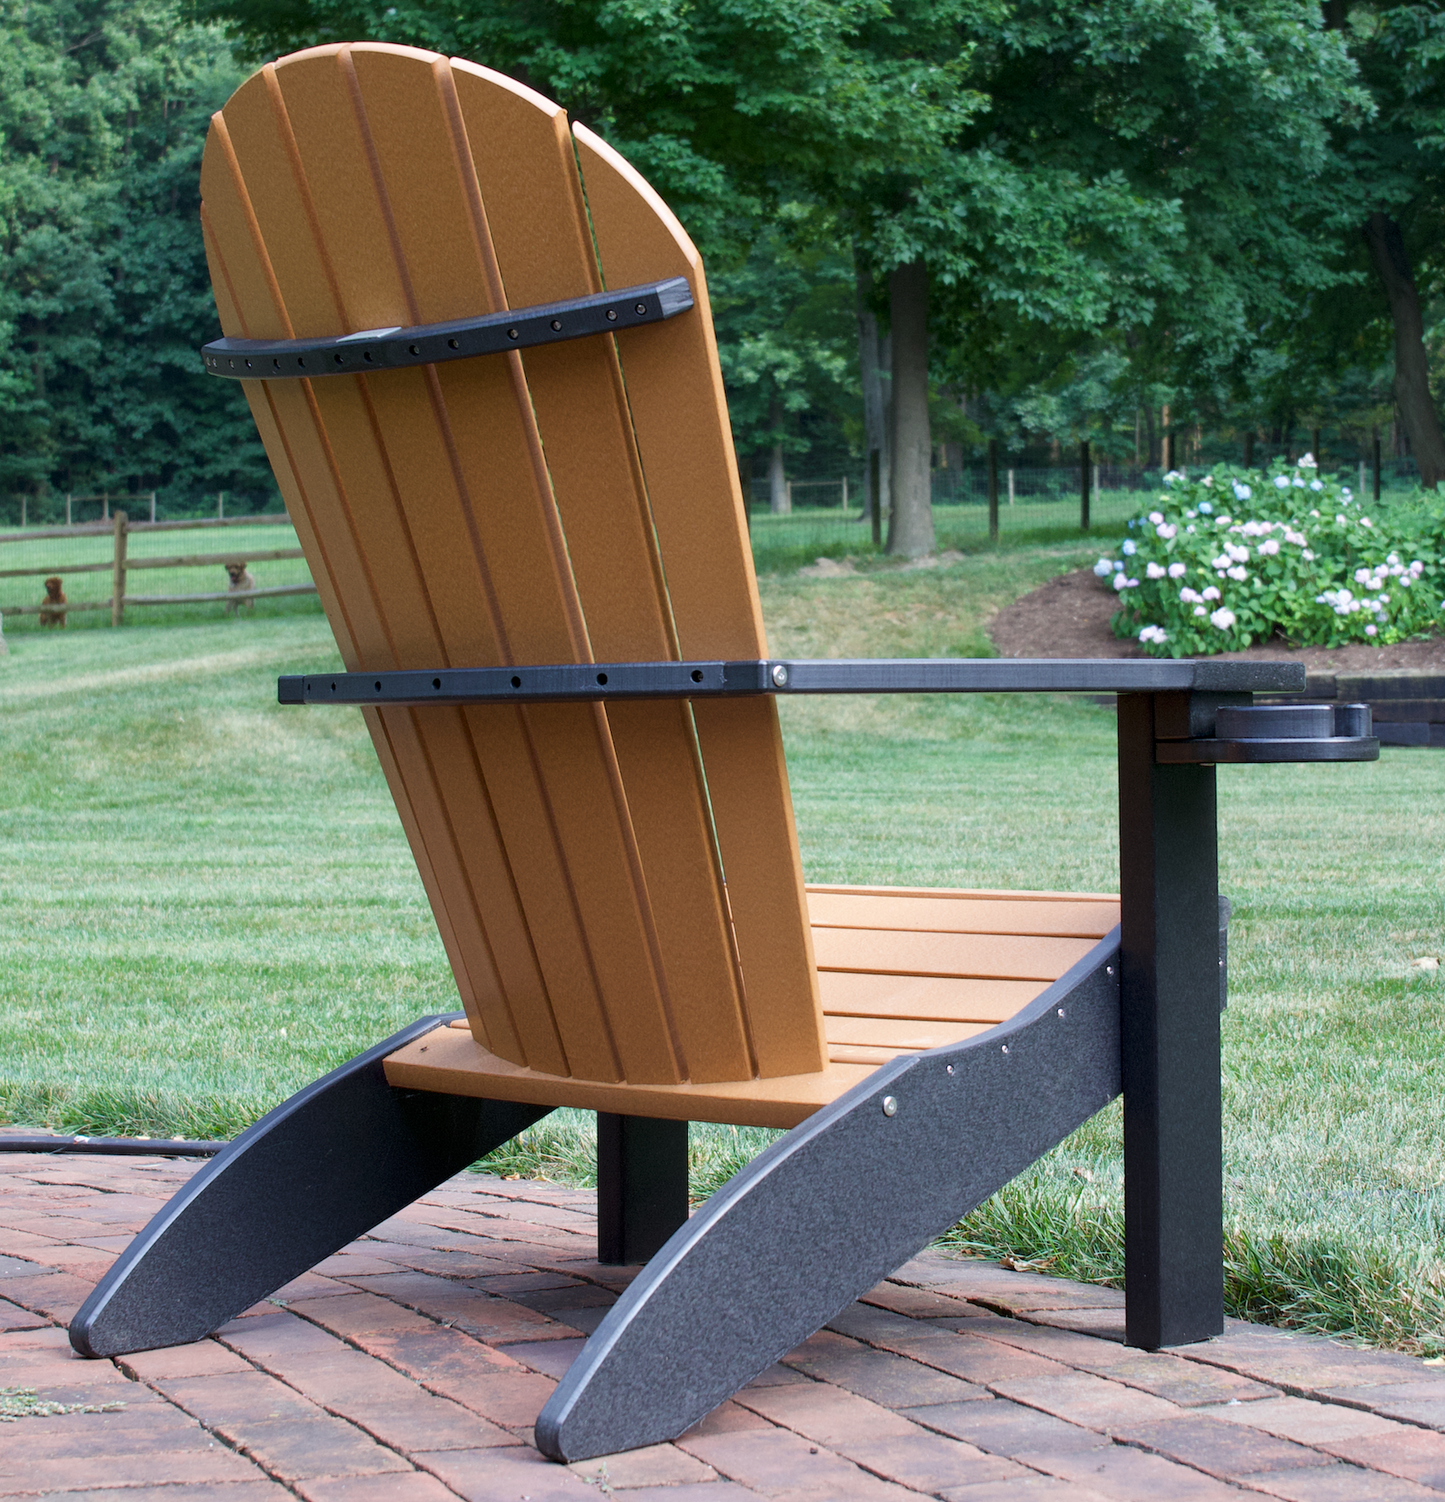 Patiova Recycled Plastic Amish Crafted Adirondack Chair - LEAD TIME TO SHIP 3 WEEKS